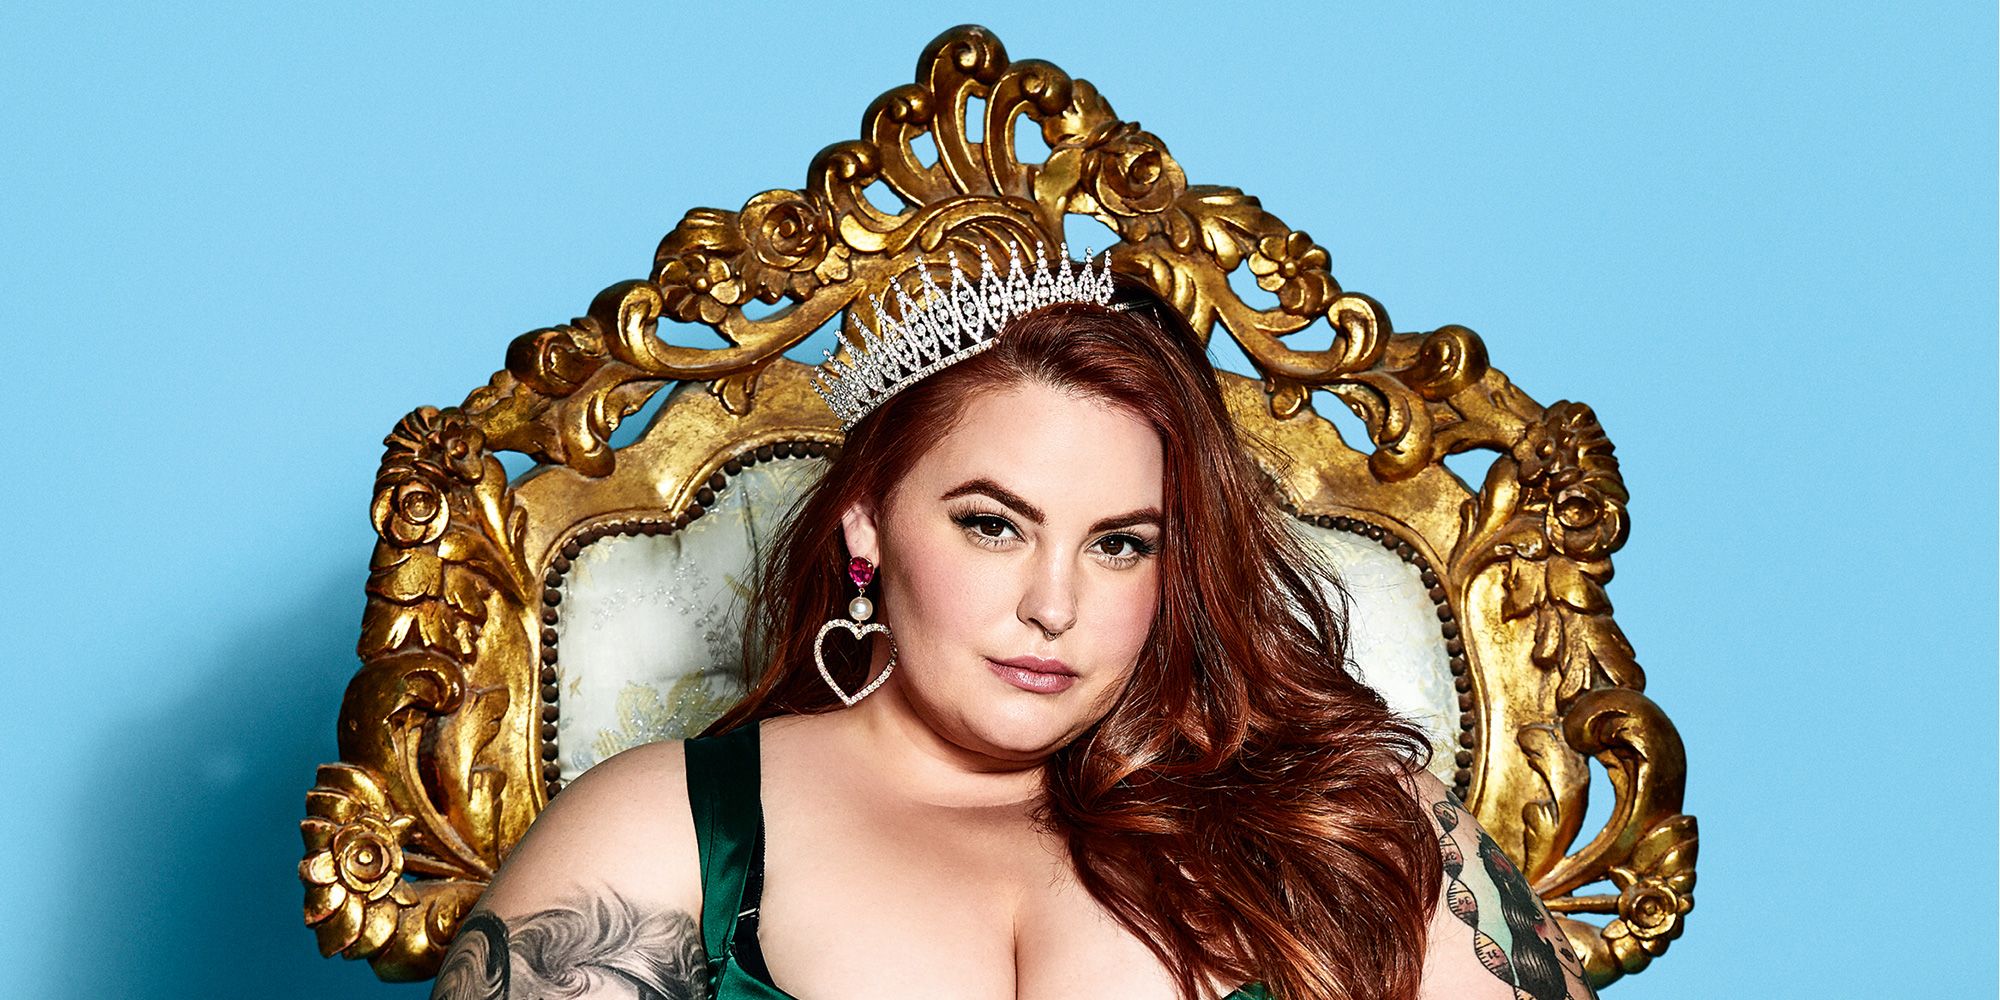 I wish I could just disappear: Tess Holliday on dealing with crippling  mental health